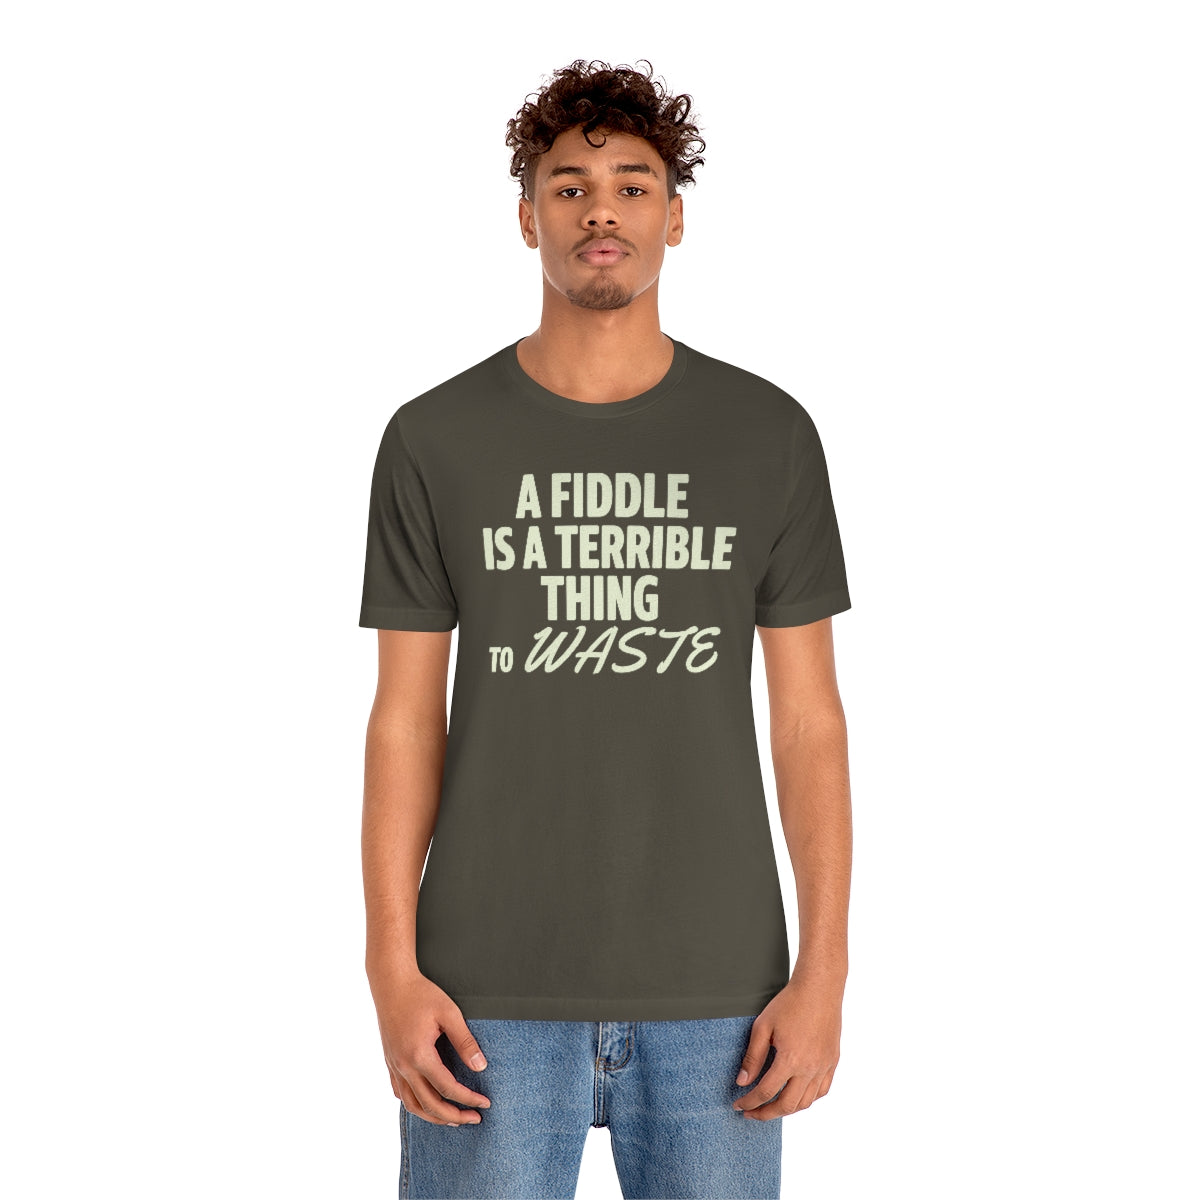 Fiddle Waste T shirt